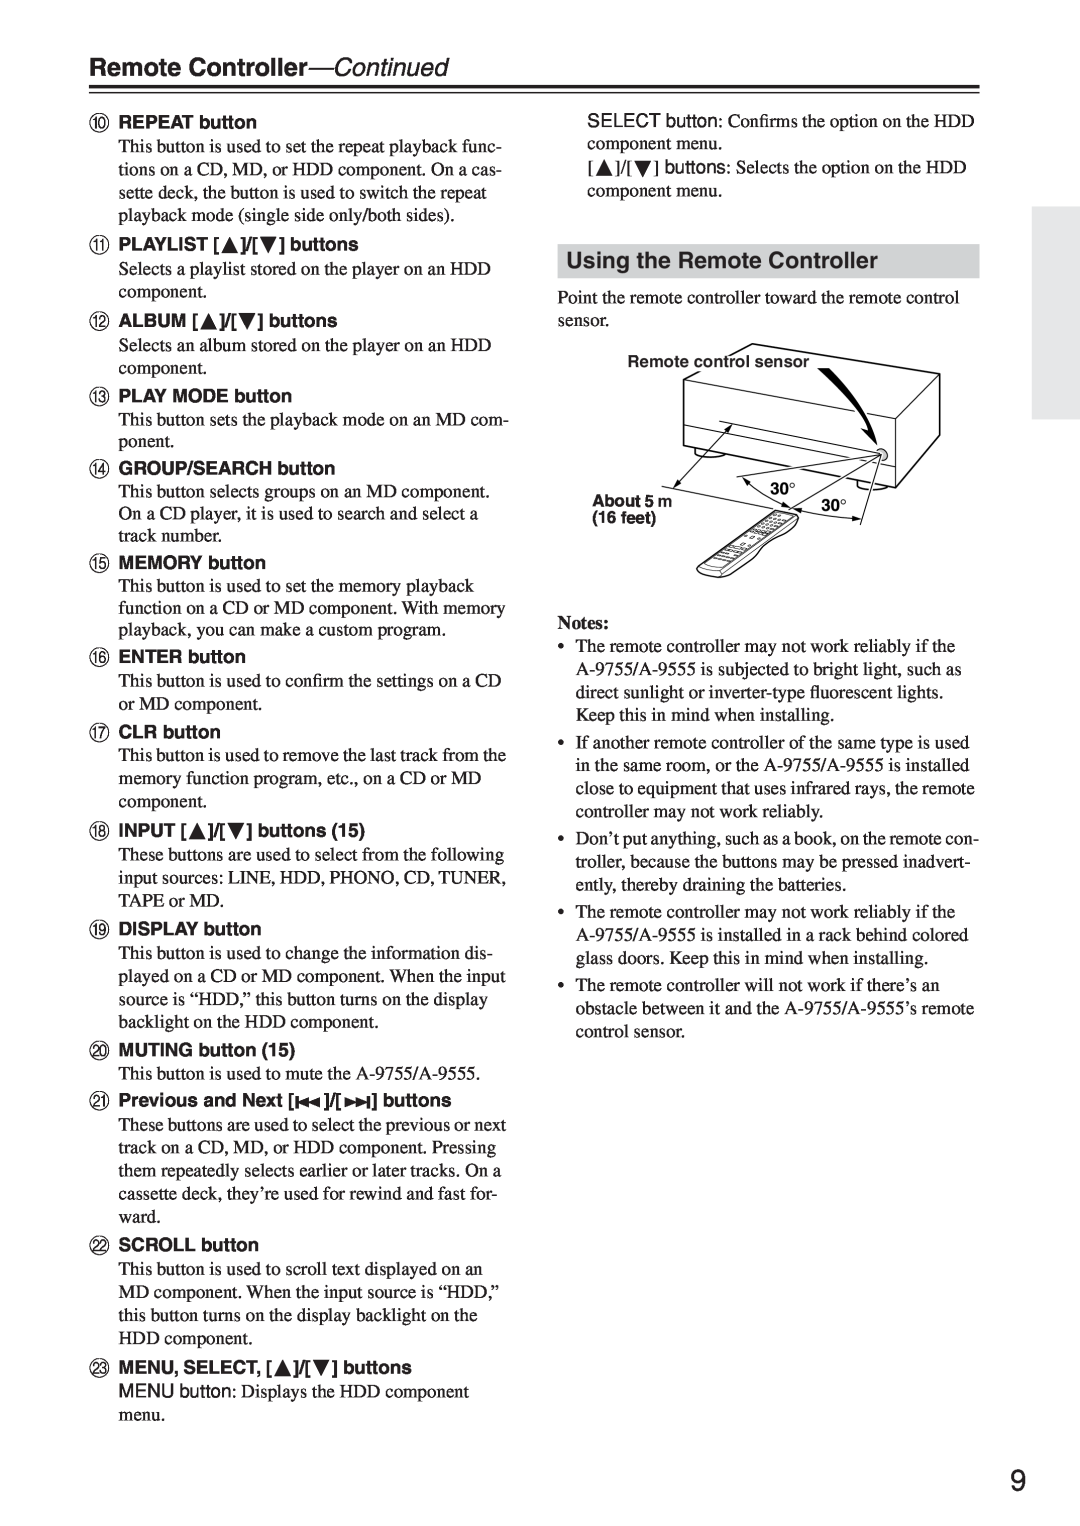 Onkyo A-9755, 9555 instruction manual Remote Controller-Continued, Using the Remote Controller 